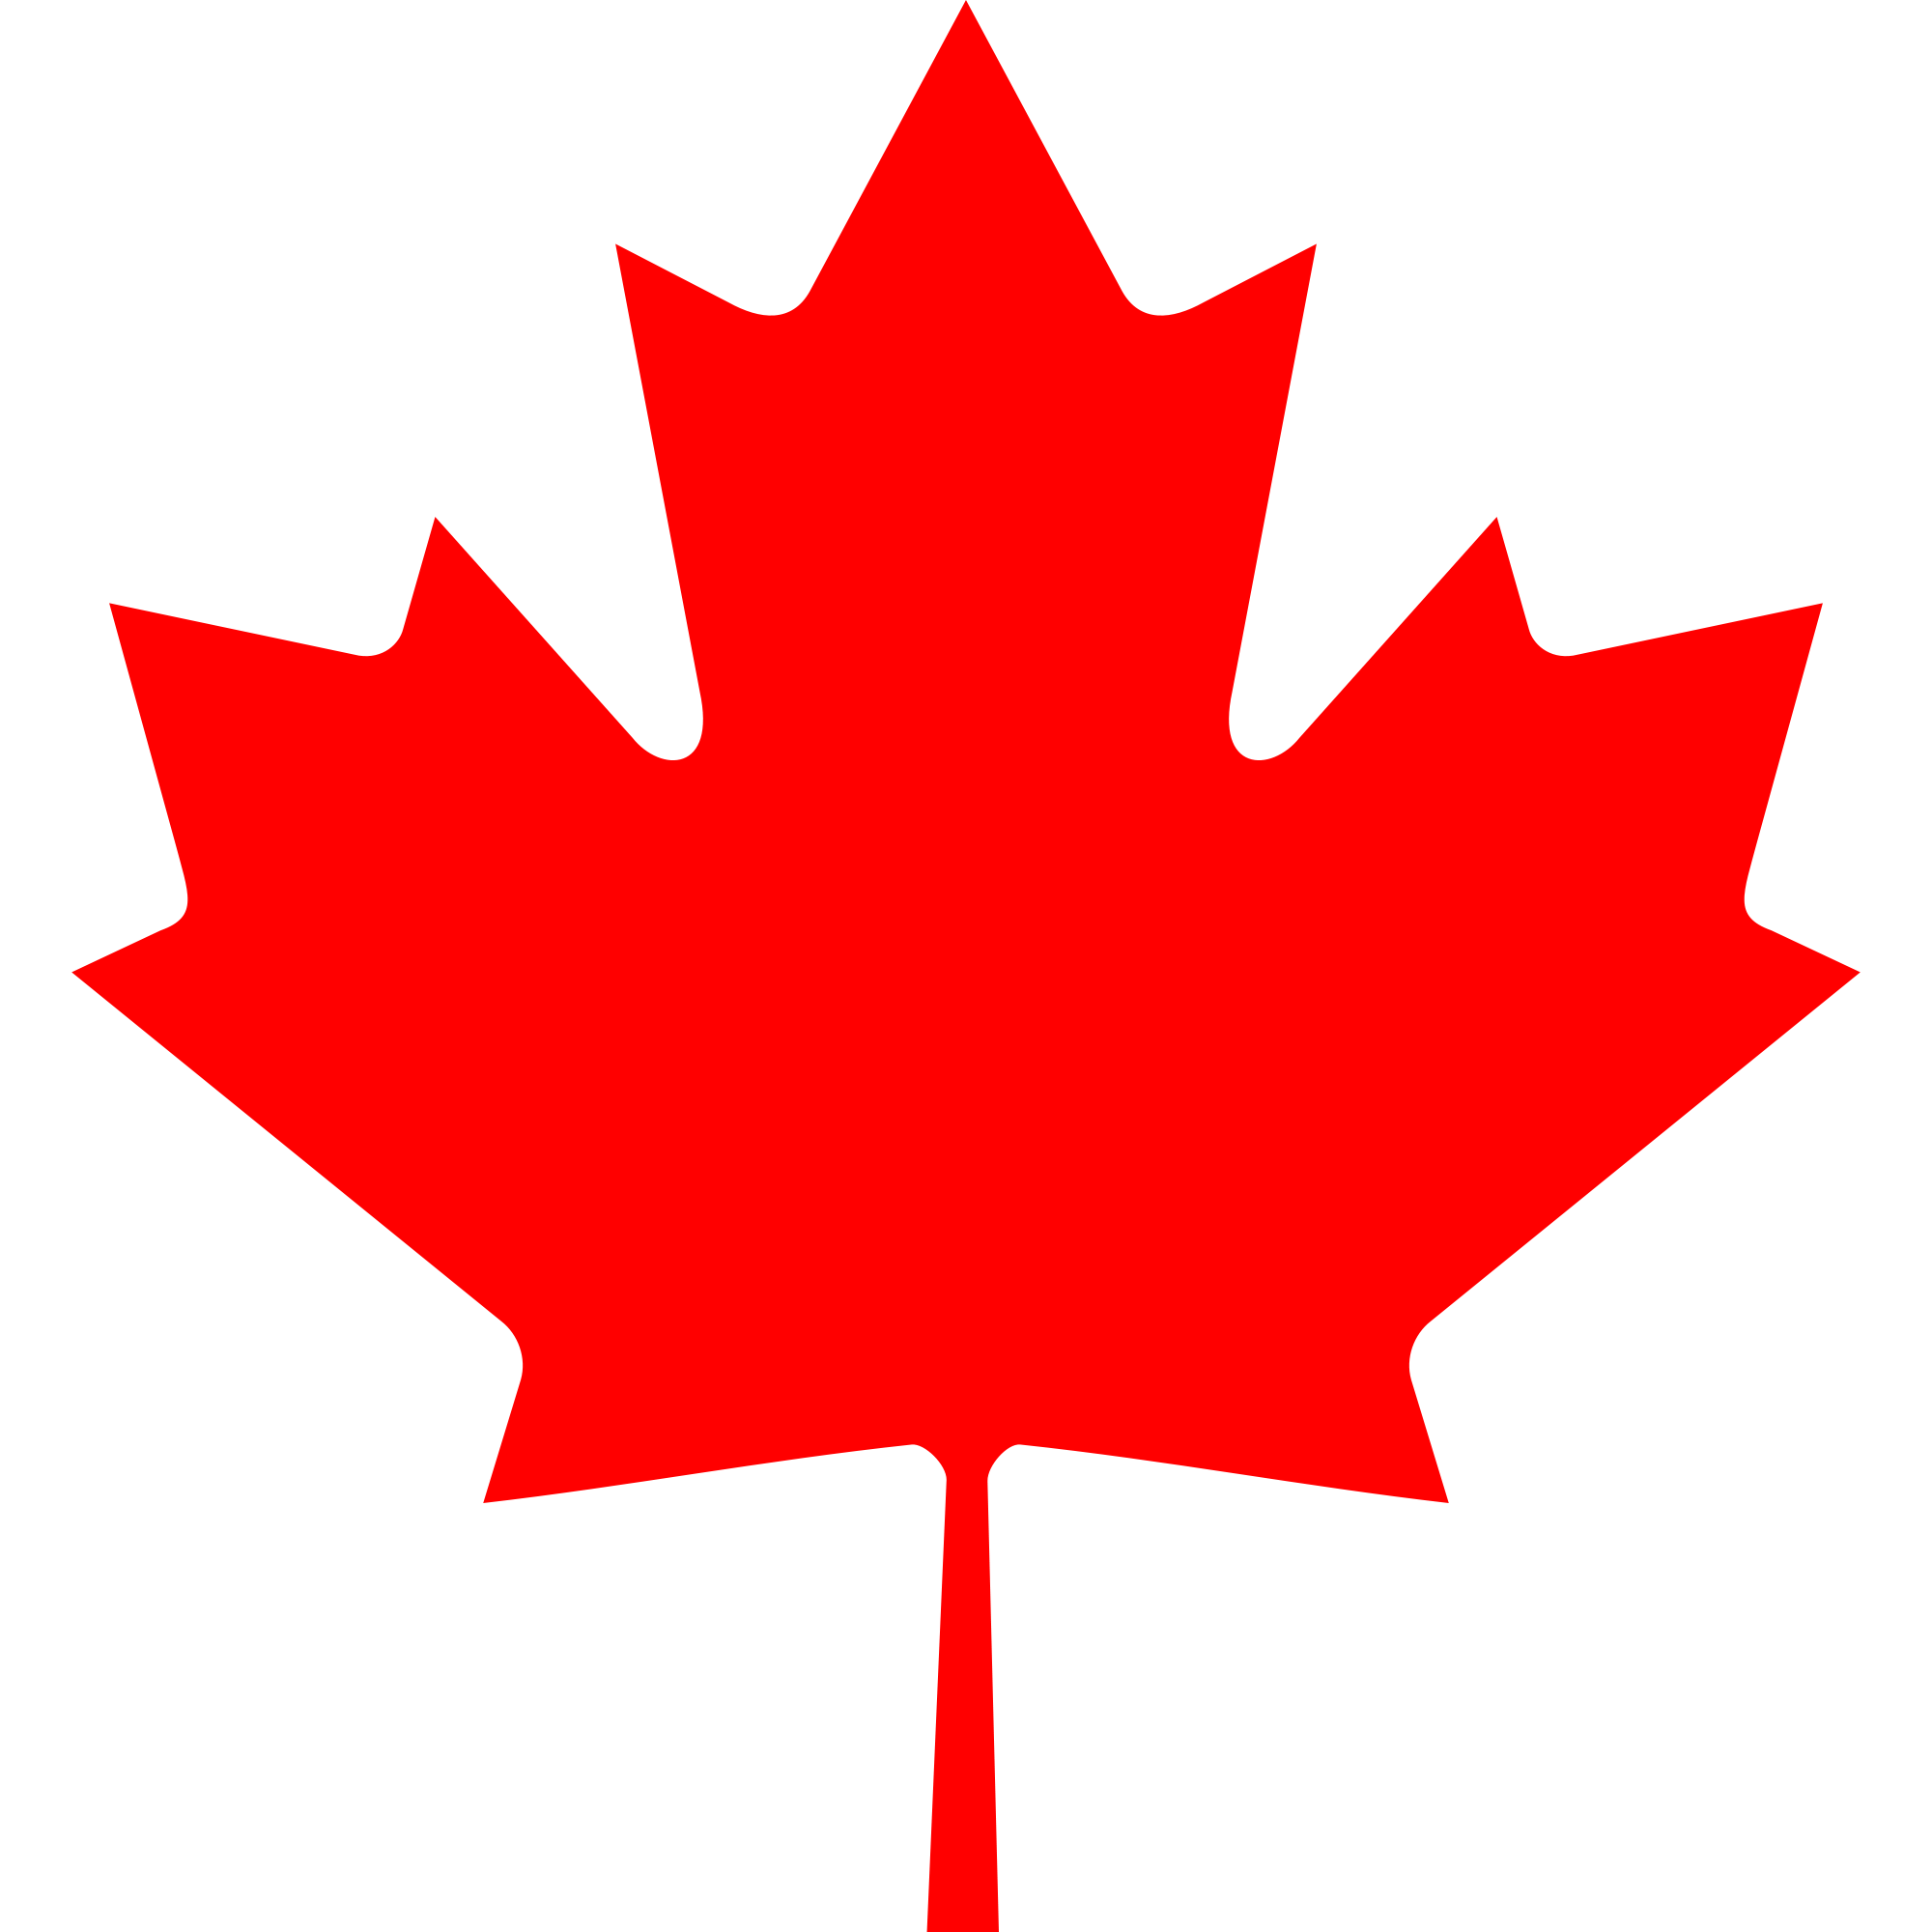 Canadian Leaf Vector - ClipArt Best